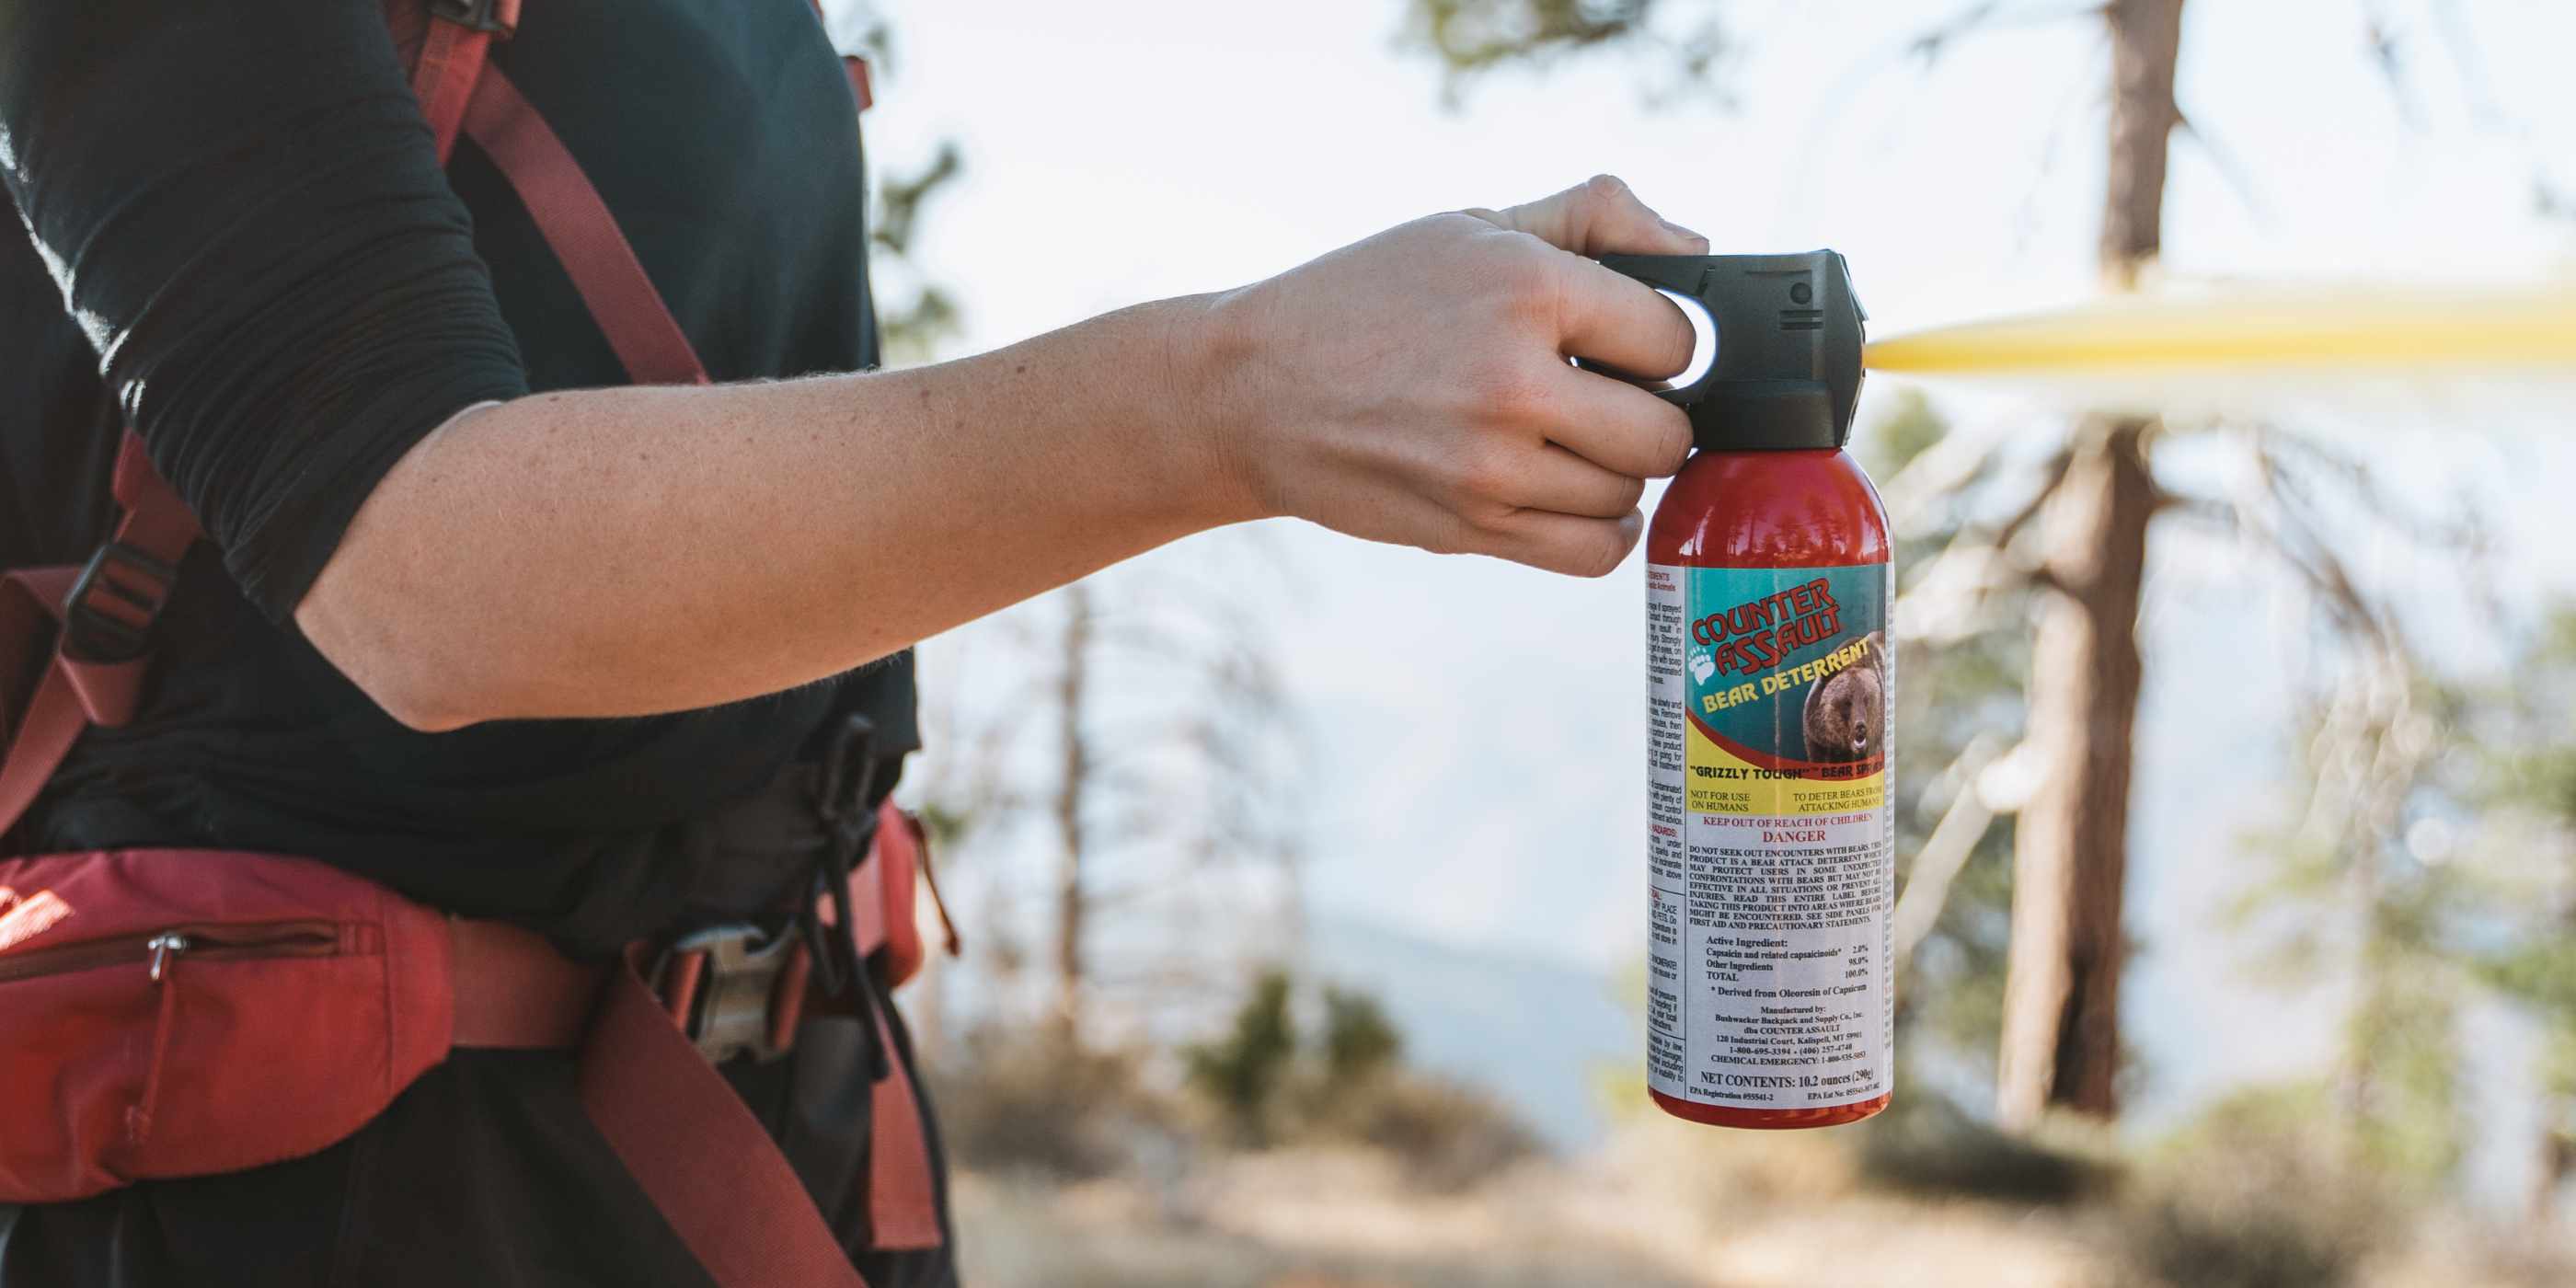 Person spraying 10.2 oz bear spray in the outdoors with red backpack on